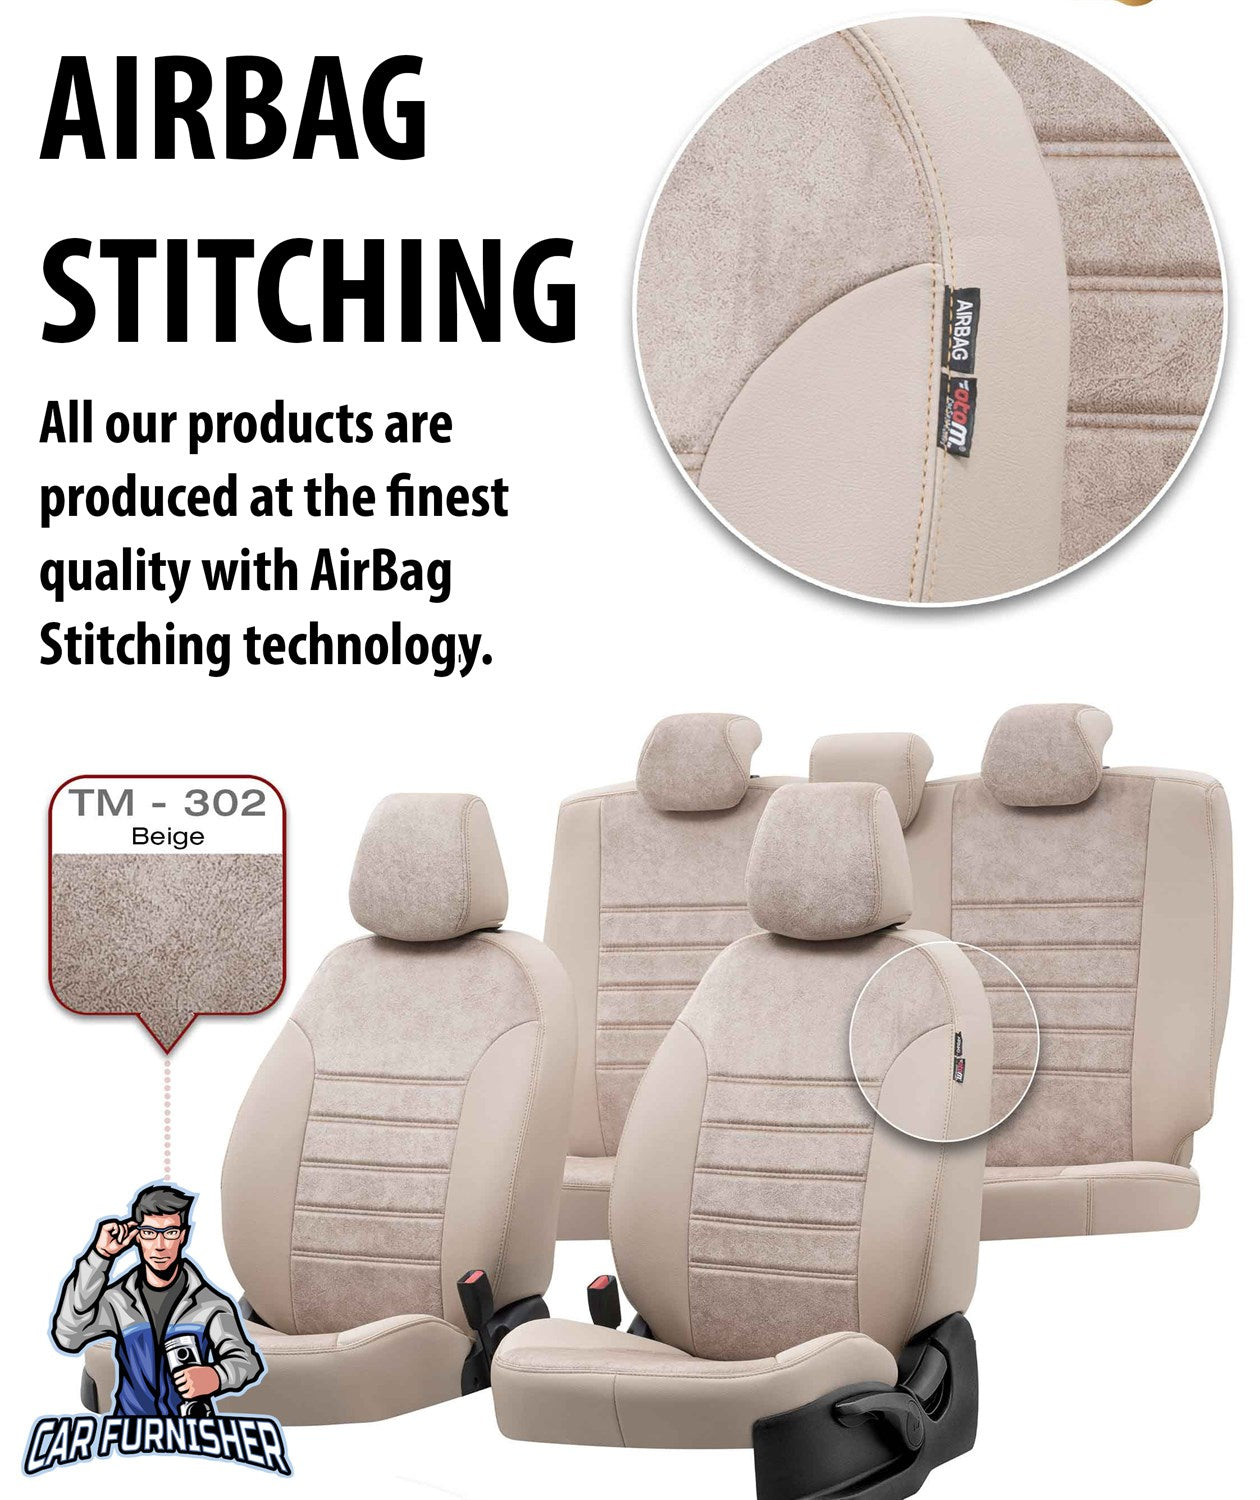 Peugeot Boxer Seat Covers Milano Suede Design Beige Leather & Suede Fabric